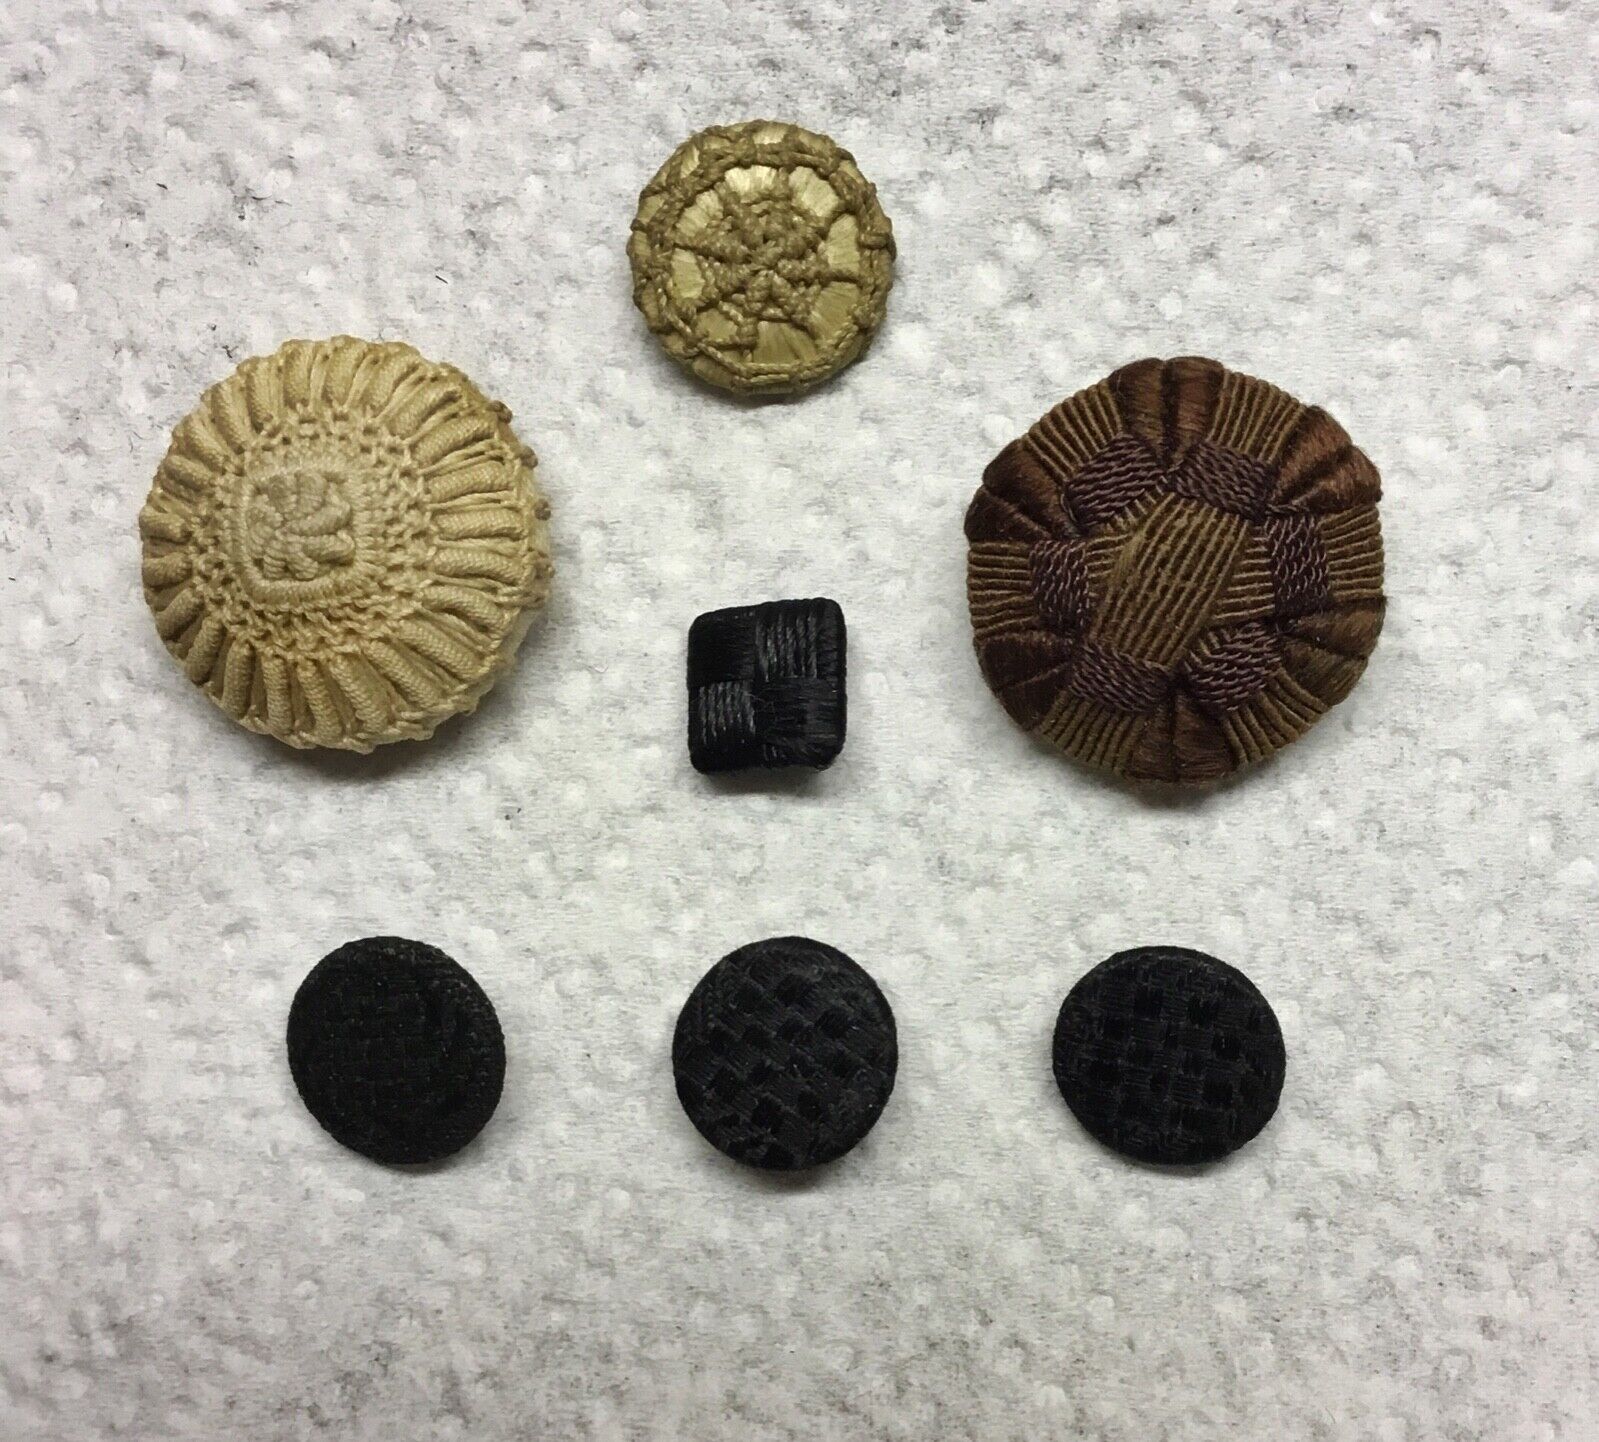 7 Vintage Woven Buttons. 